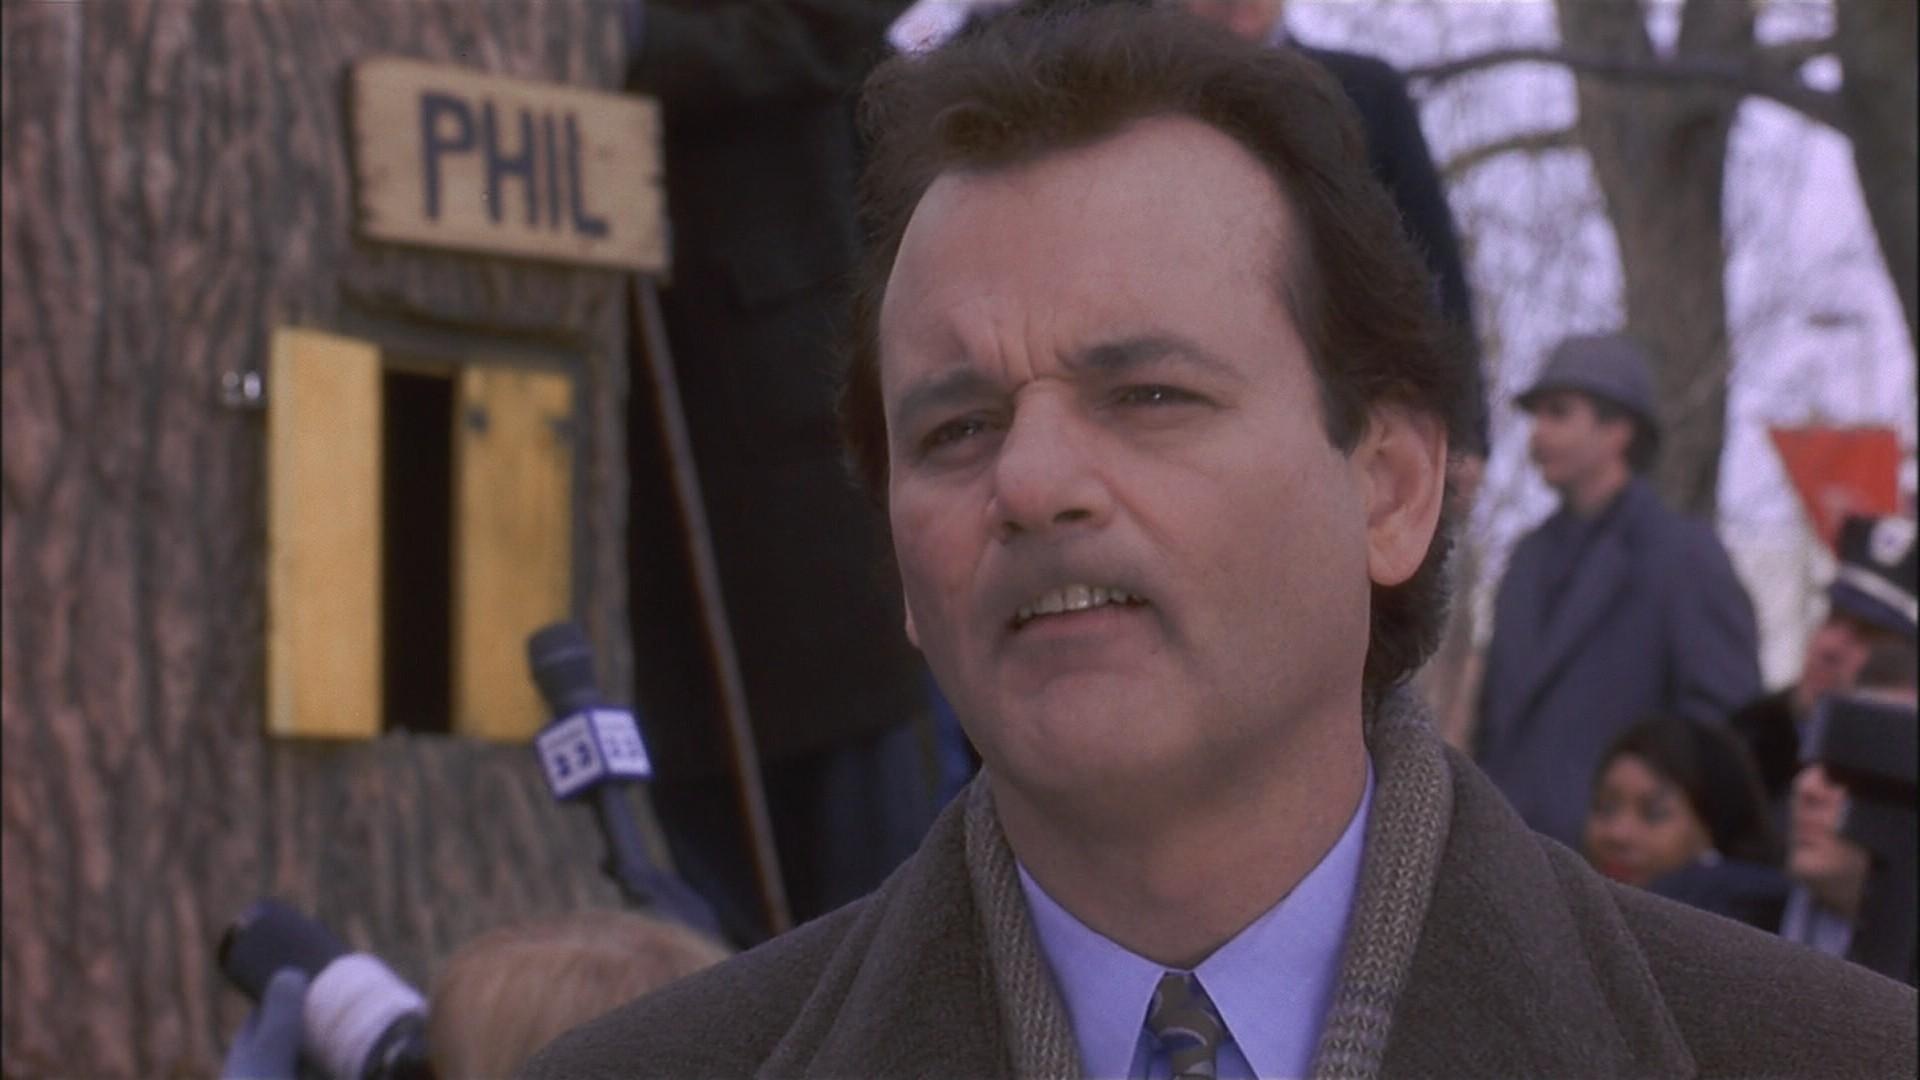 Groundhog Day (Movie): Bill Murray as Phil Connors, Music by George Fenton. 1920x1080 Full HD Wallpaper.